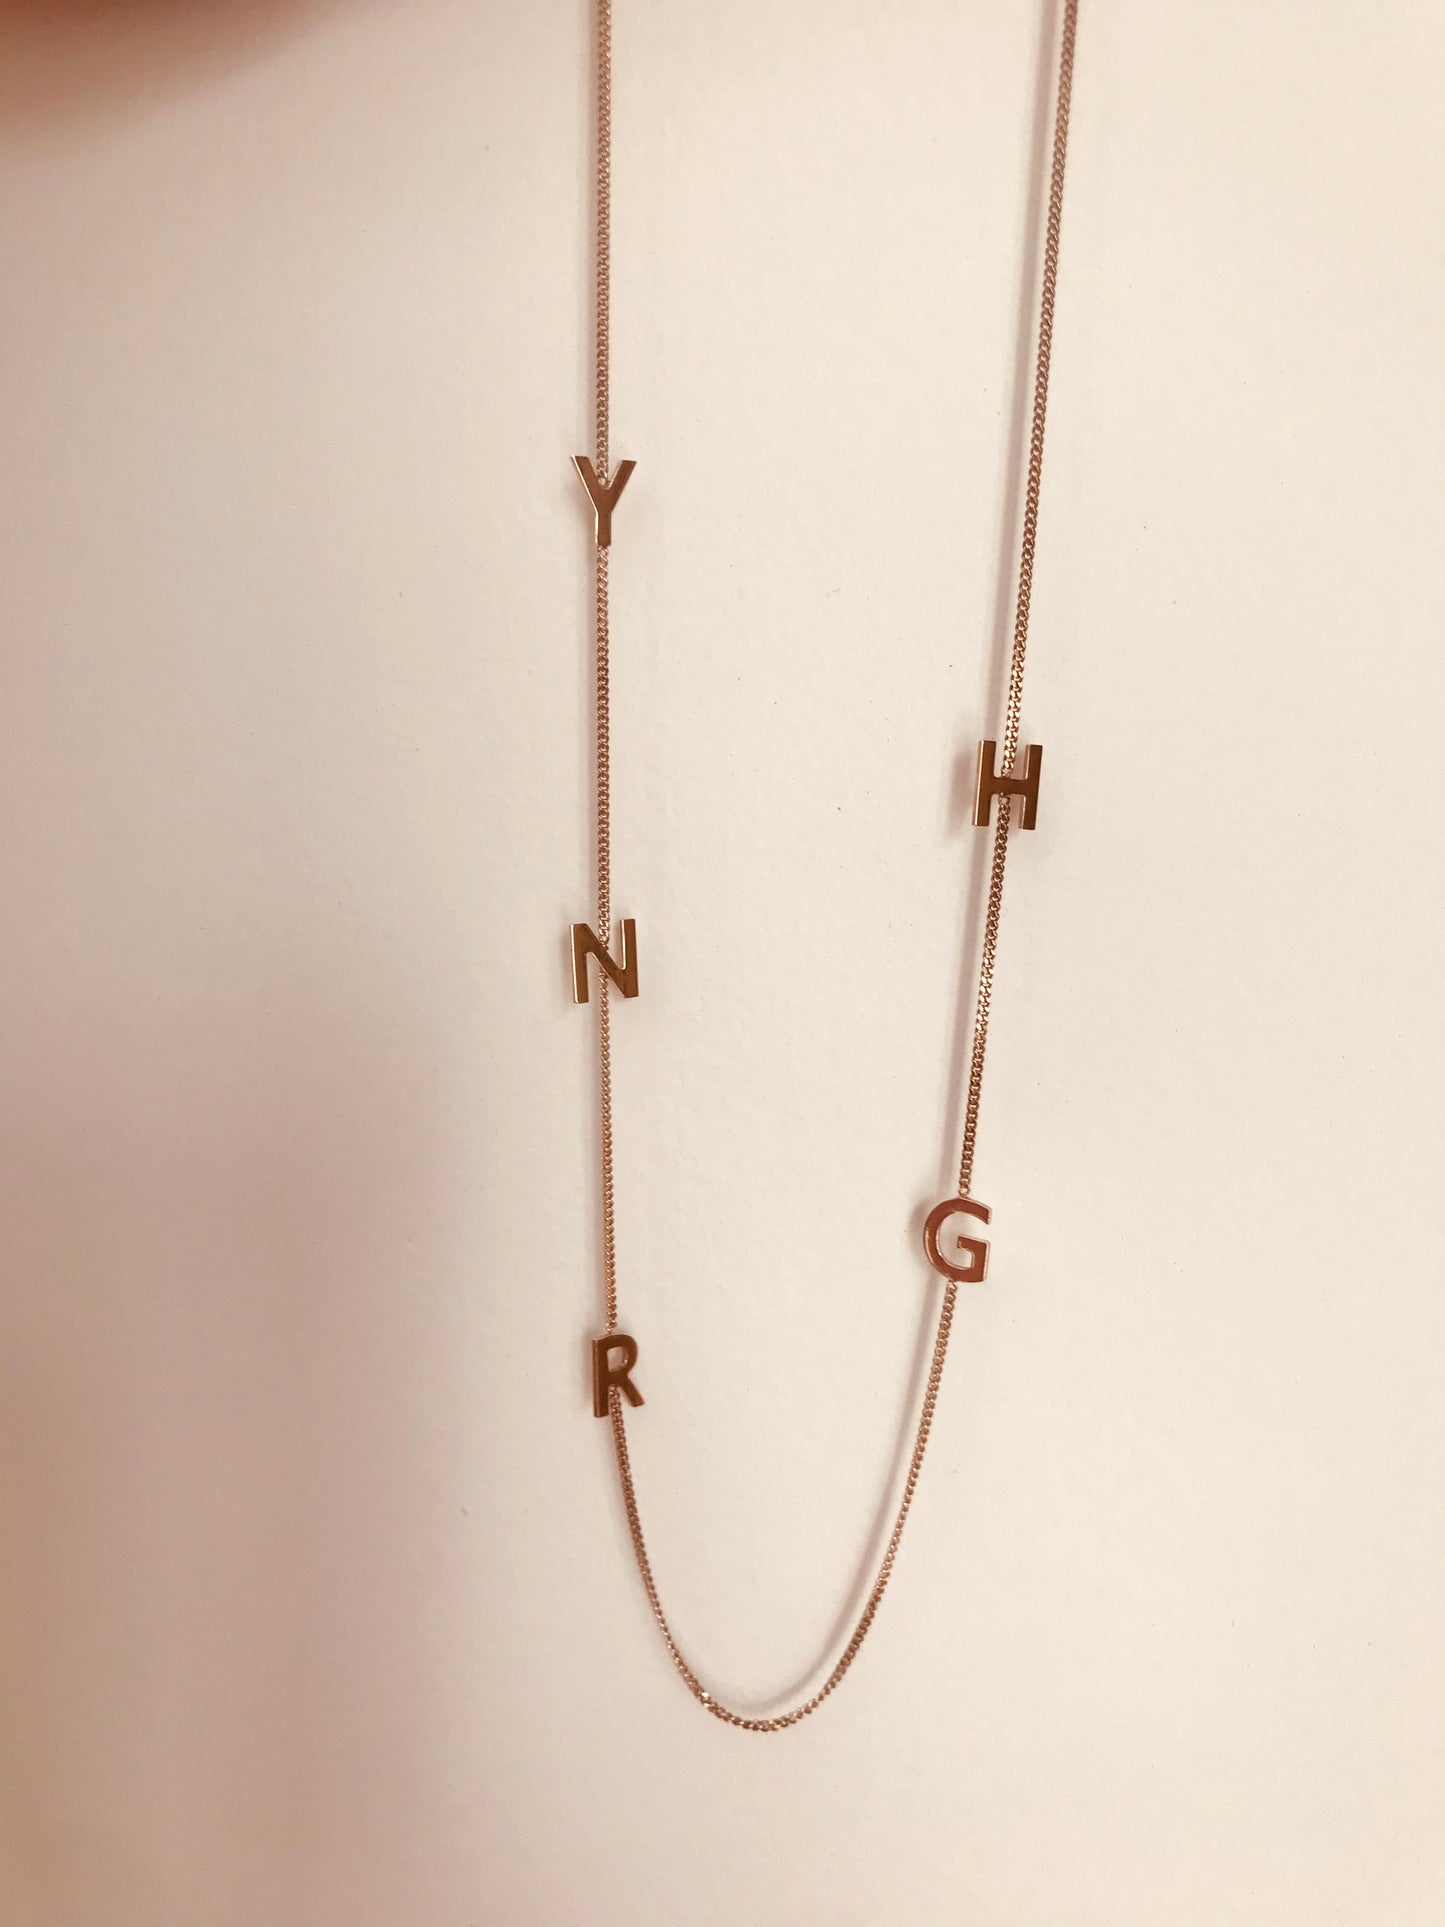 LETTERS ON CHAIN necklace - BYVELA jewellery